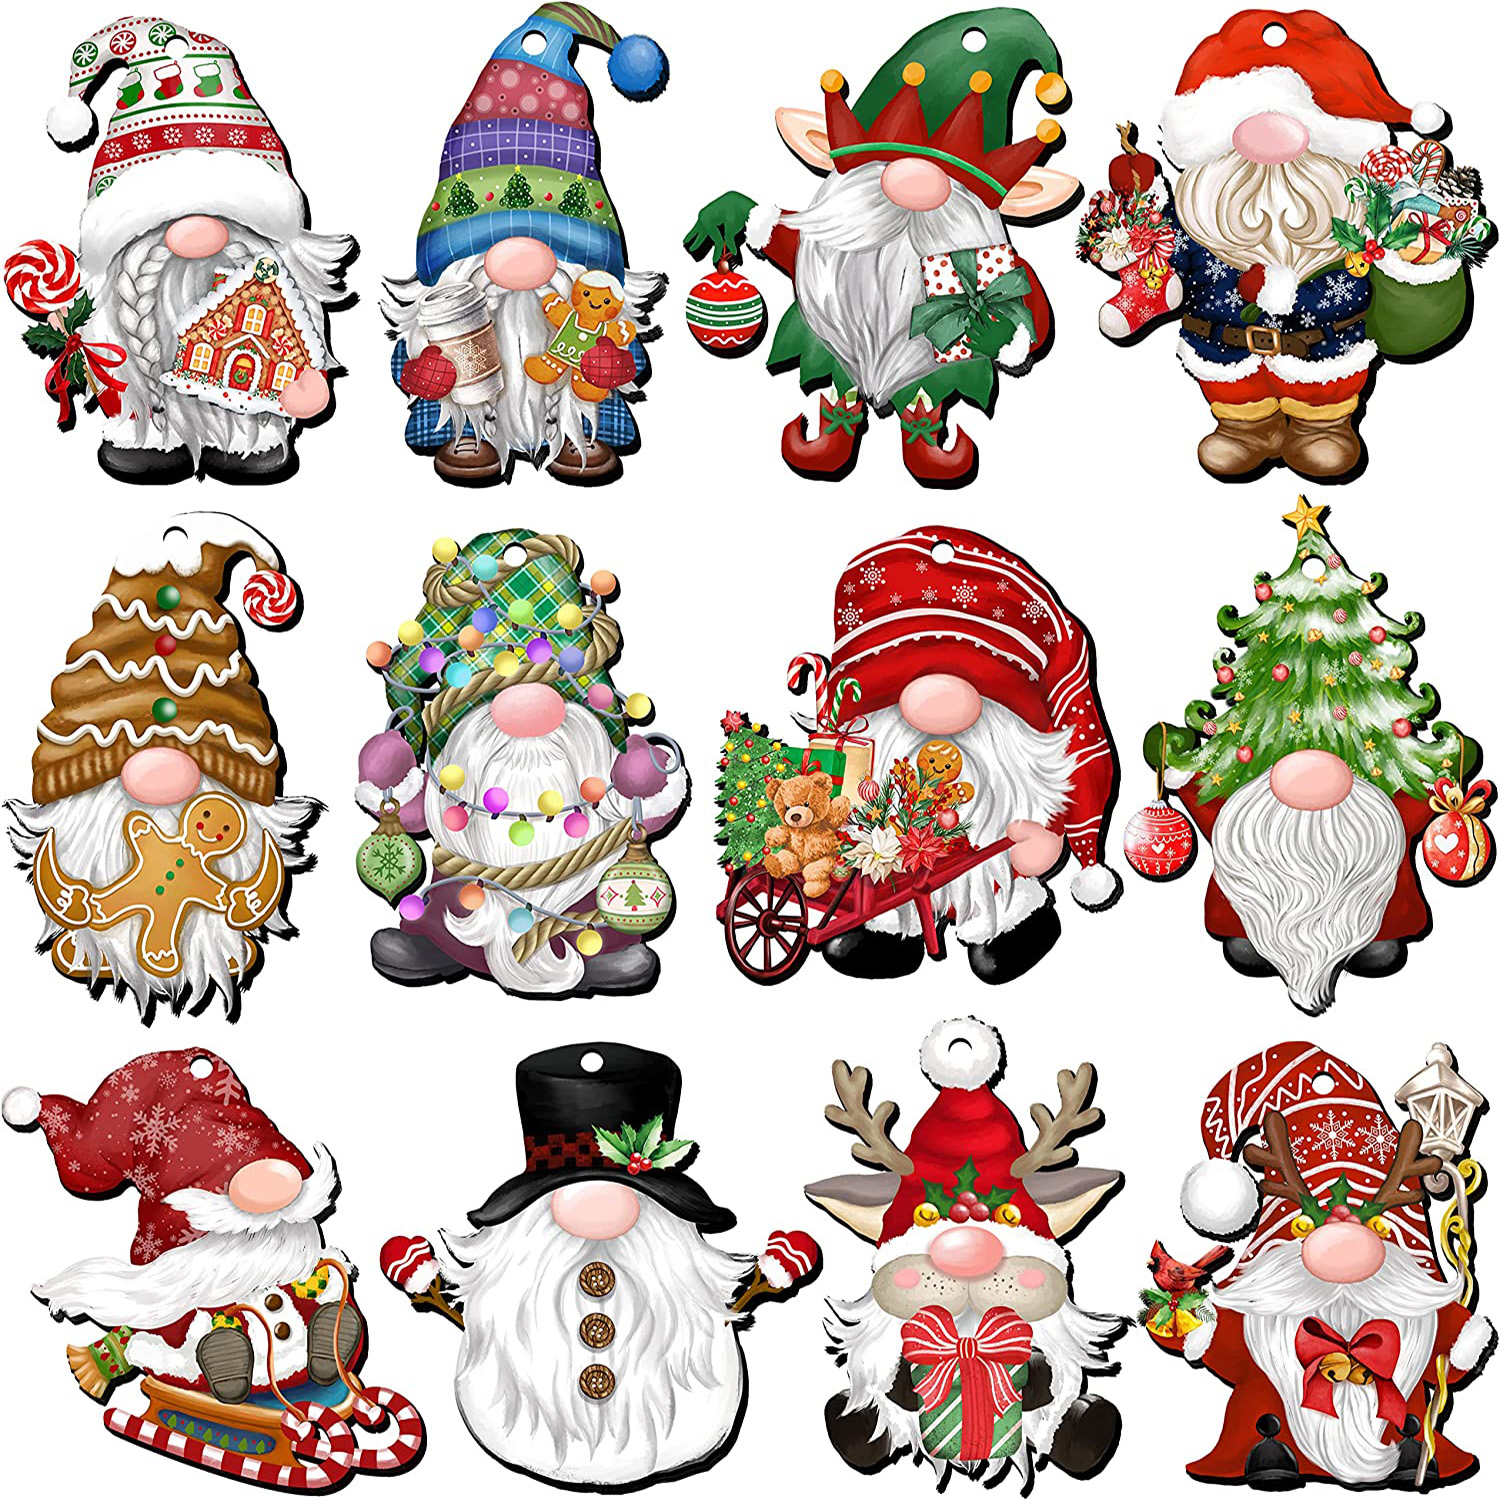 

24pcs, Gnome Christmas Wooden Hanging Ornaments, Tree Decorations, Yard Decoration, Yard Supplies, Party Decor, Holiday Supplies, Holiday Arrangement, Garden Decor